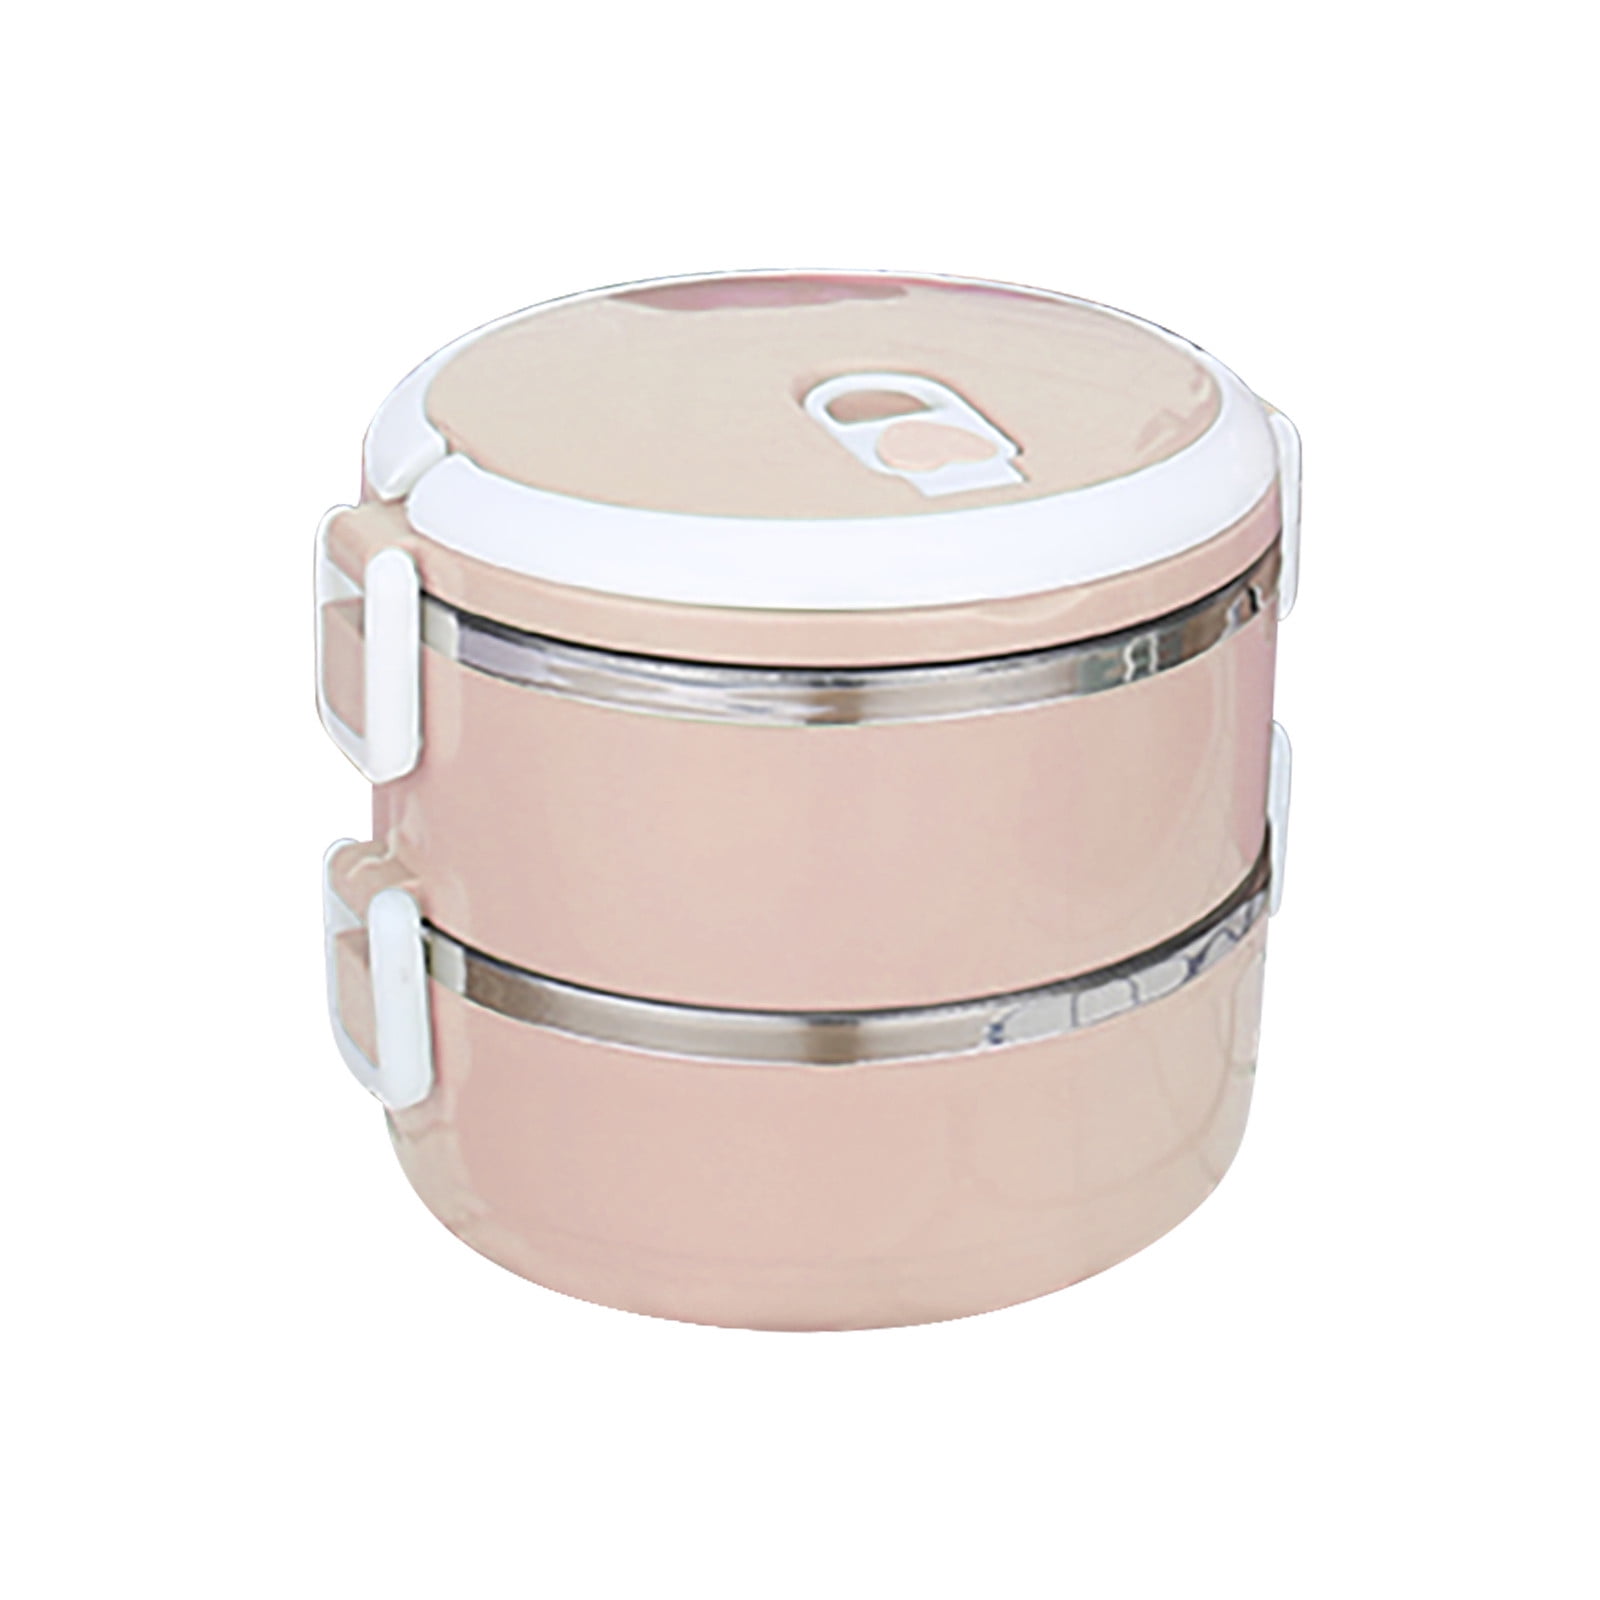 Acorn Street Machine-Washable Insulated Pink Lunch Box Comes With 2 Small  1.5 Cup Food Container and 1 Large 4 Cup Food Container 